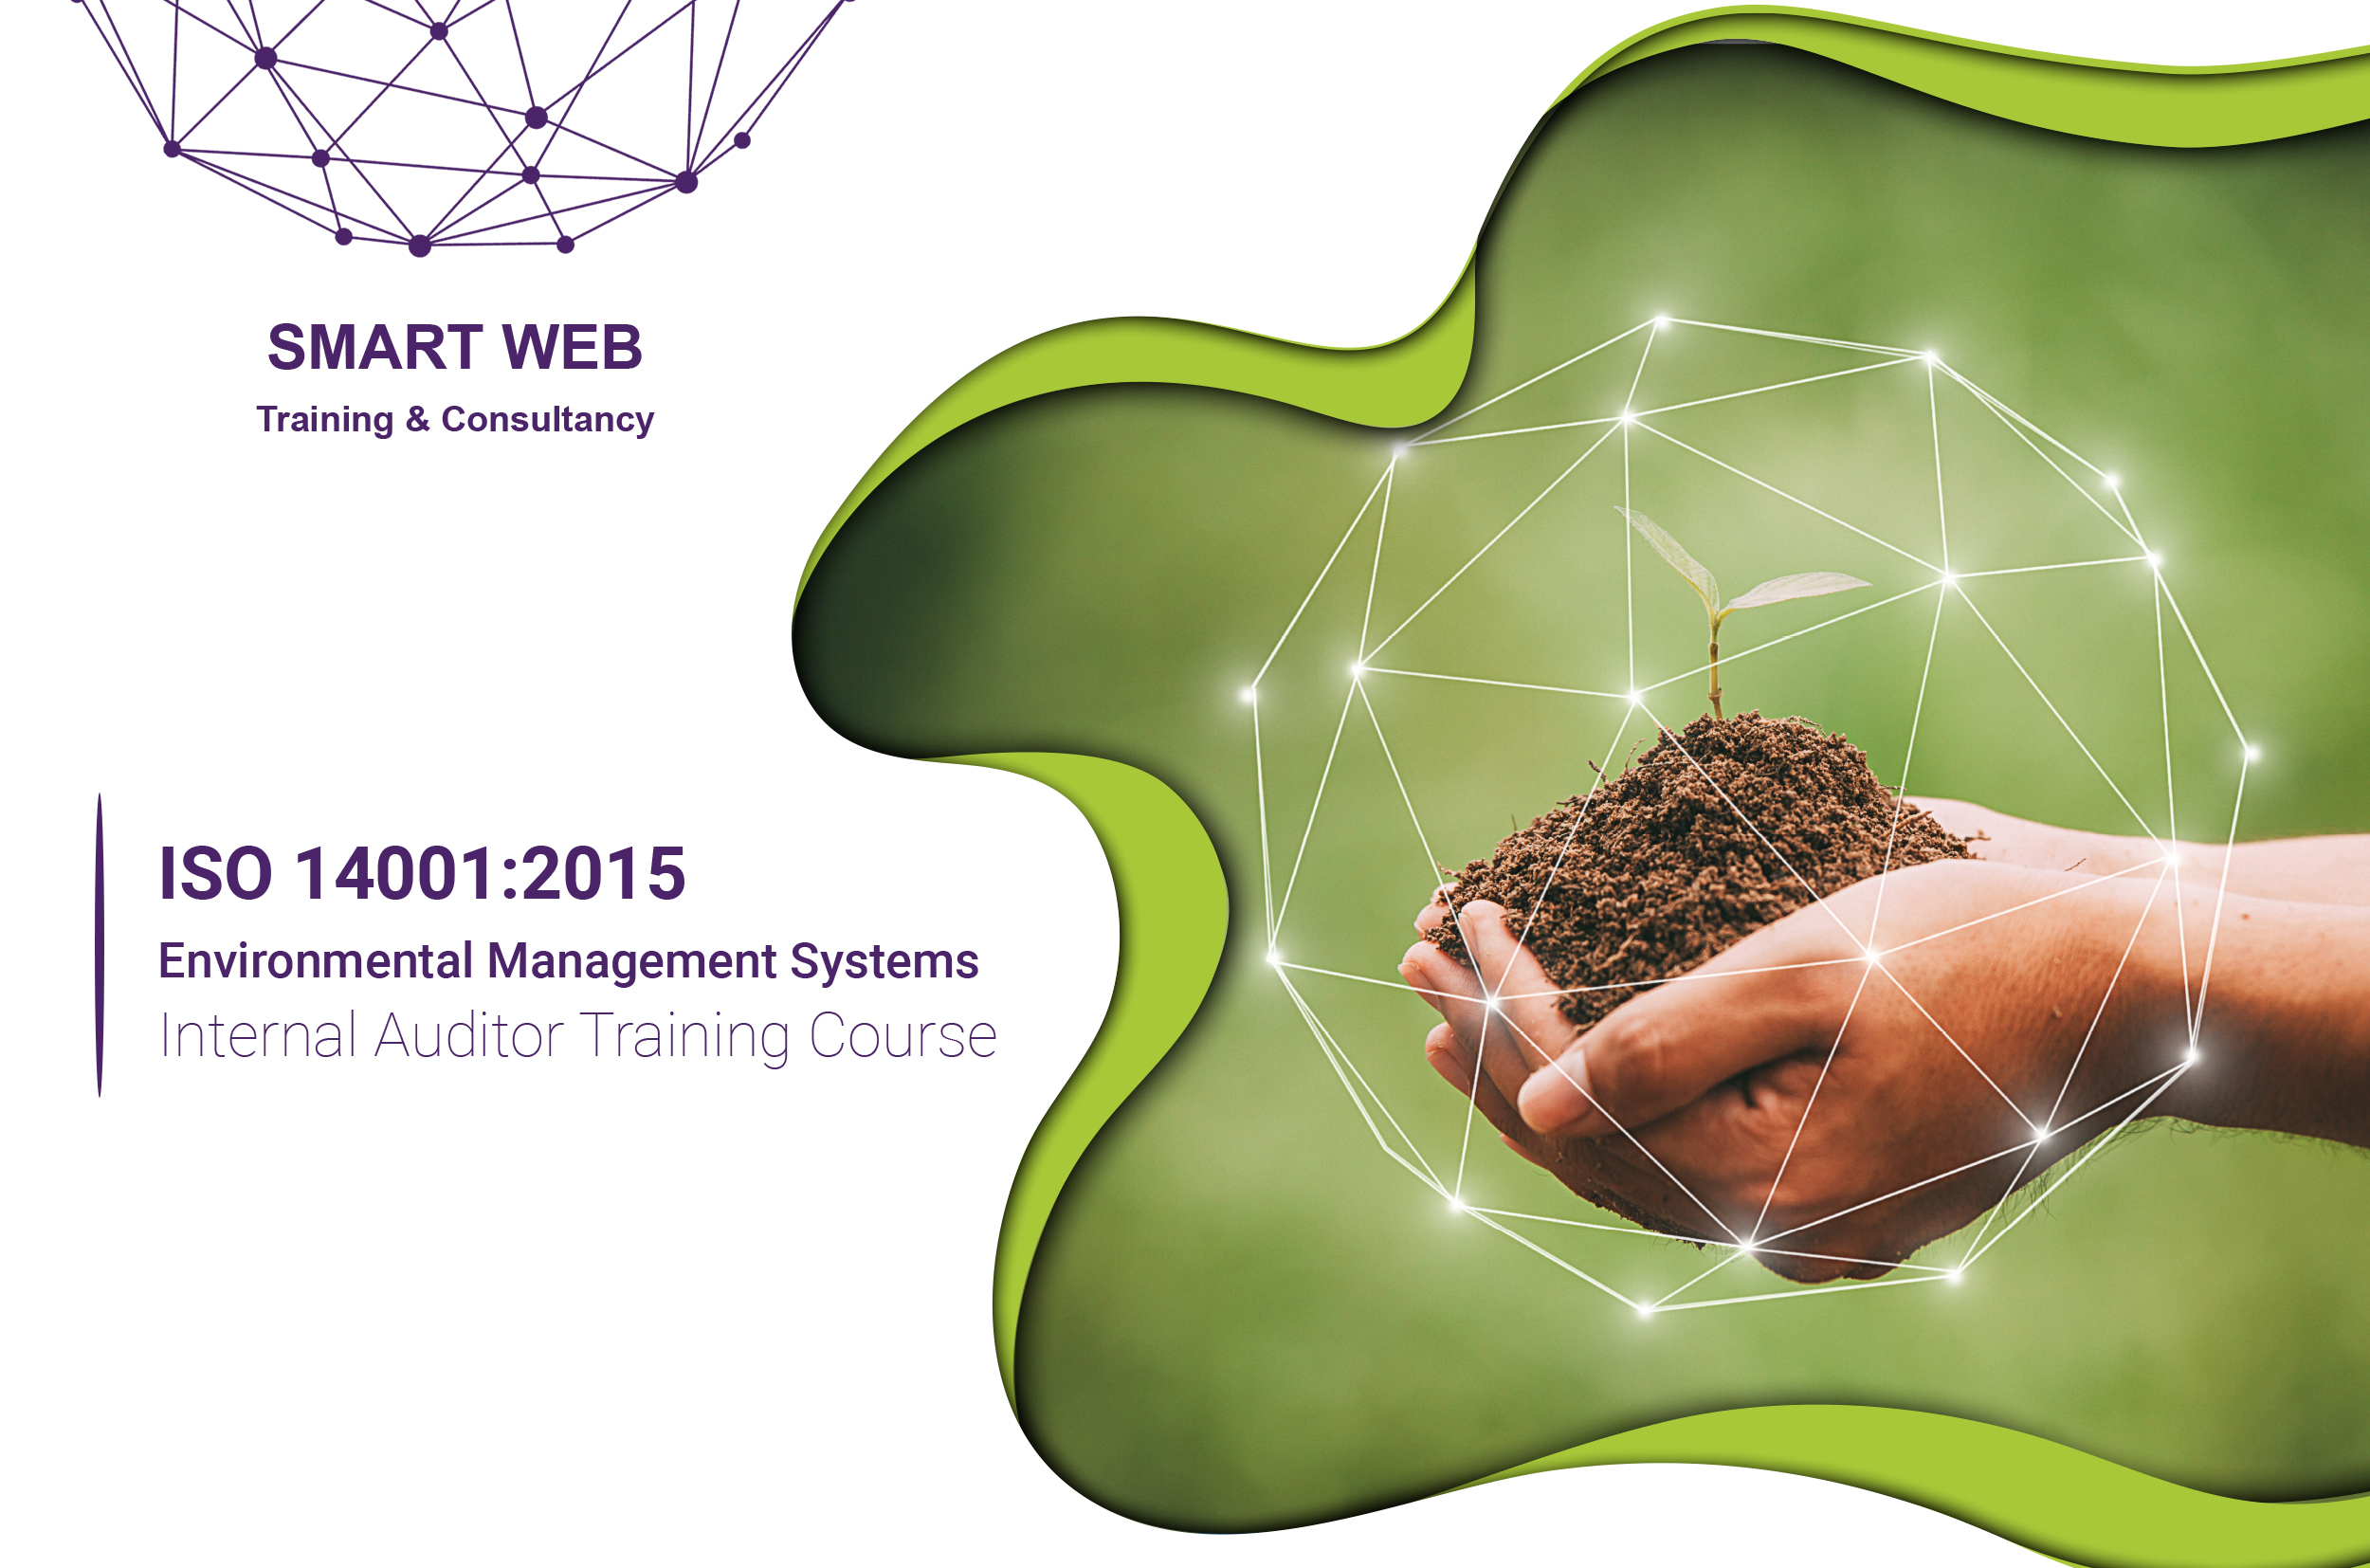 ISO 14001:2015 - Environmental Management Systems - Internal Auditor Training Course